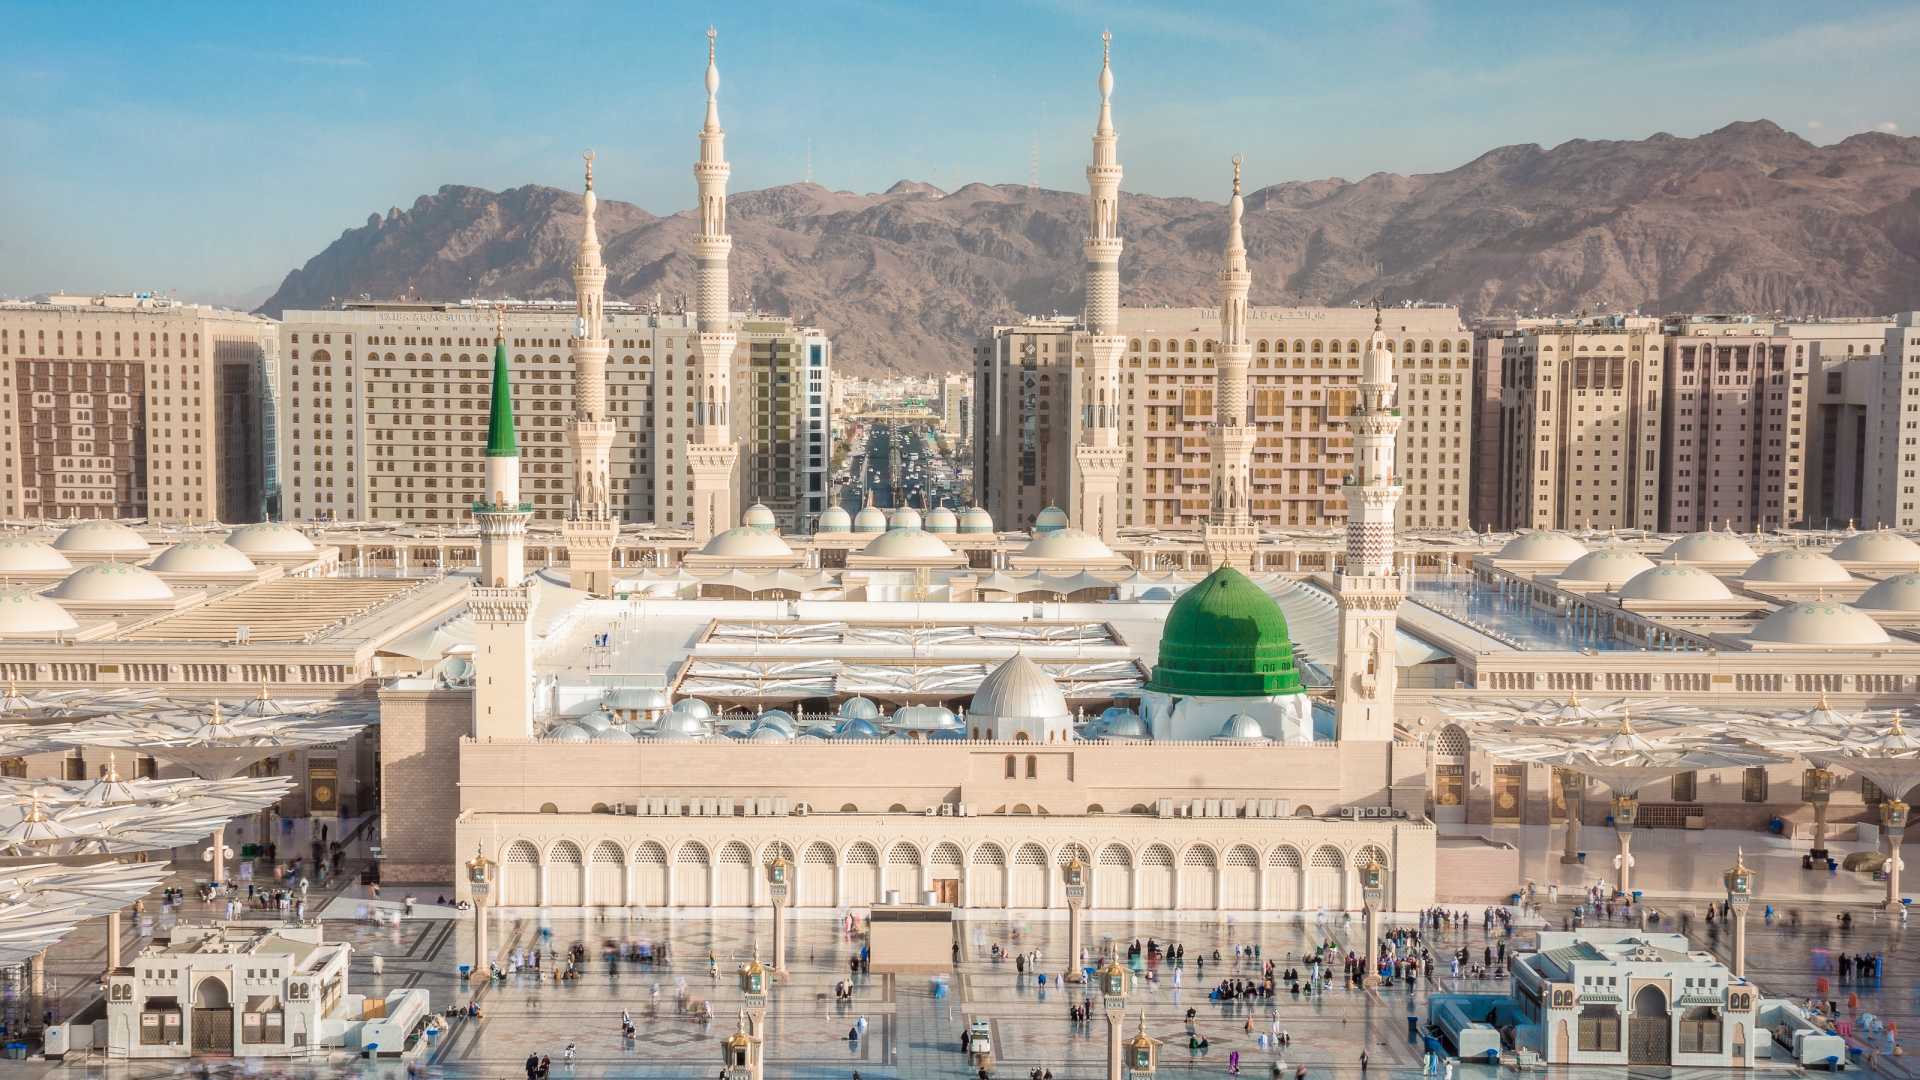 The Blessed Al Masjid An Nabawi The Prophet's Mosque (SAWS) in